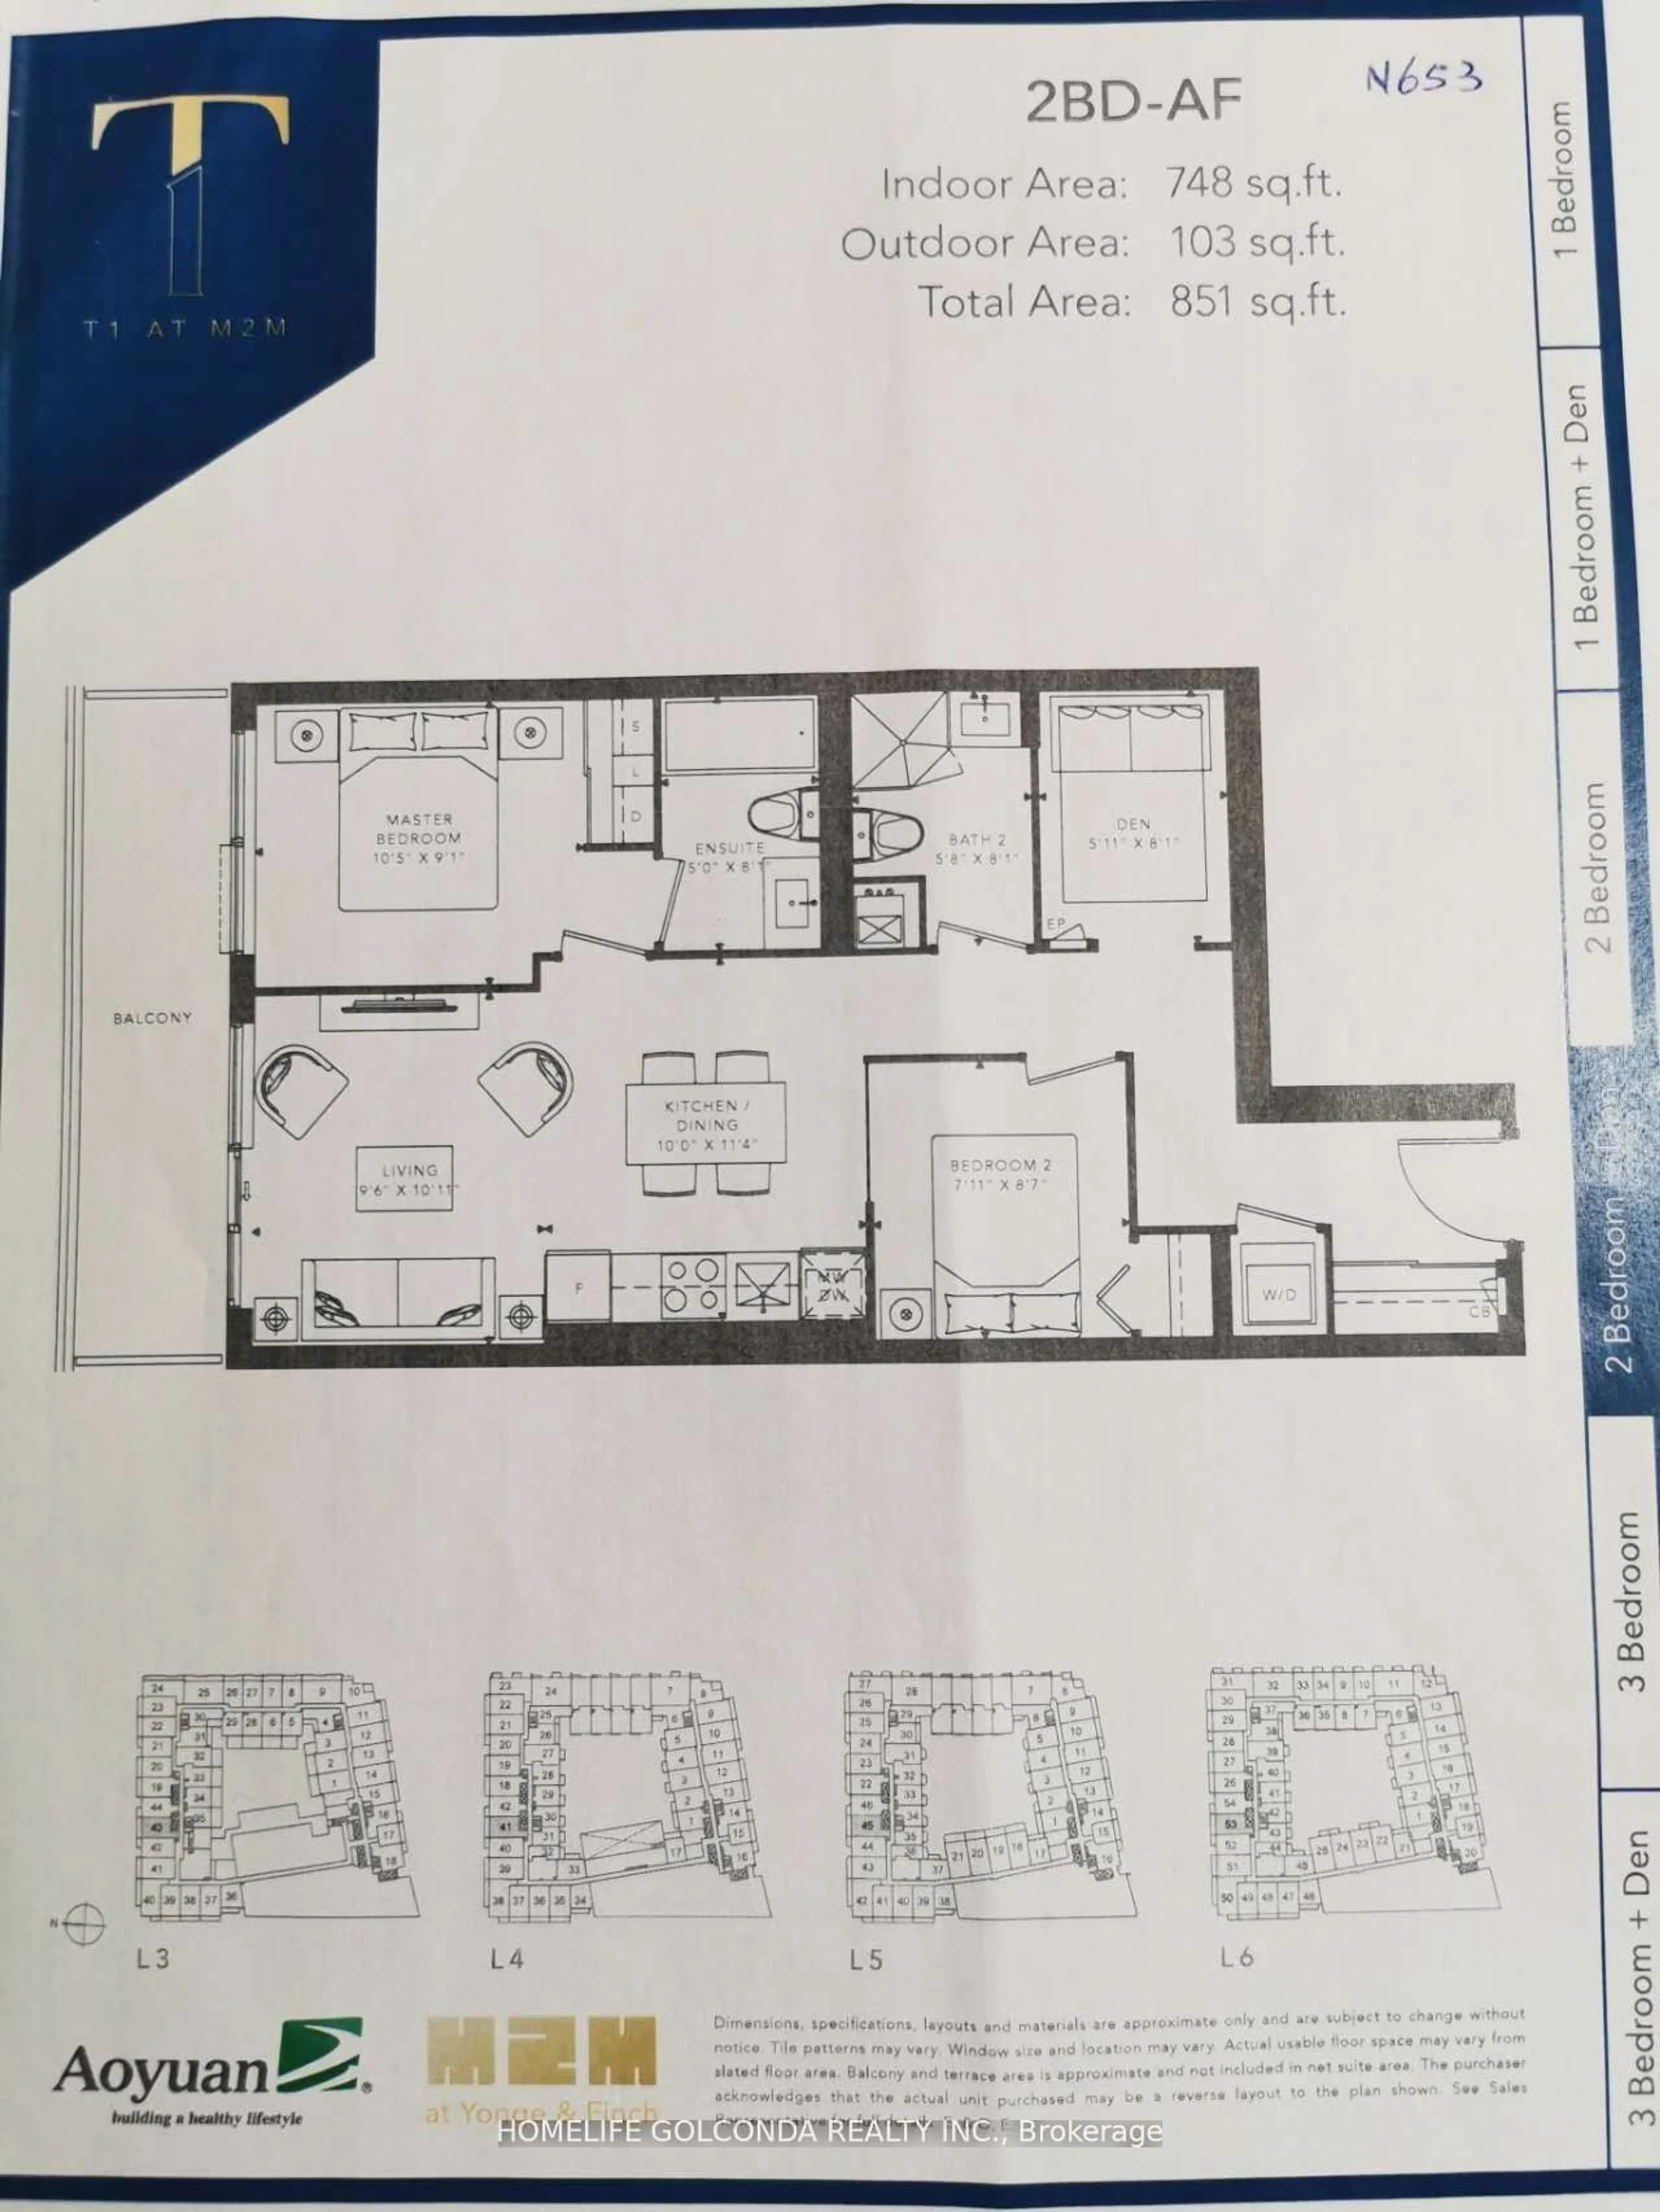 Floor plan for 7 Olympic Gdn Dr #N653, Toronto Ontario M2M 2A9